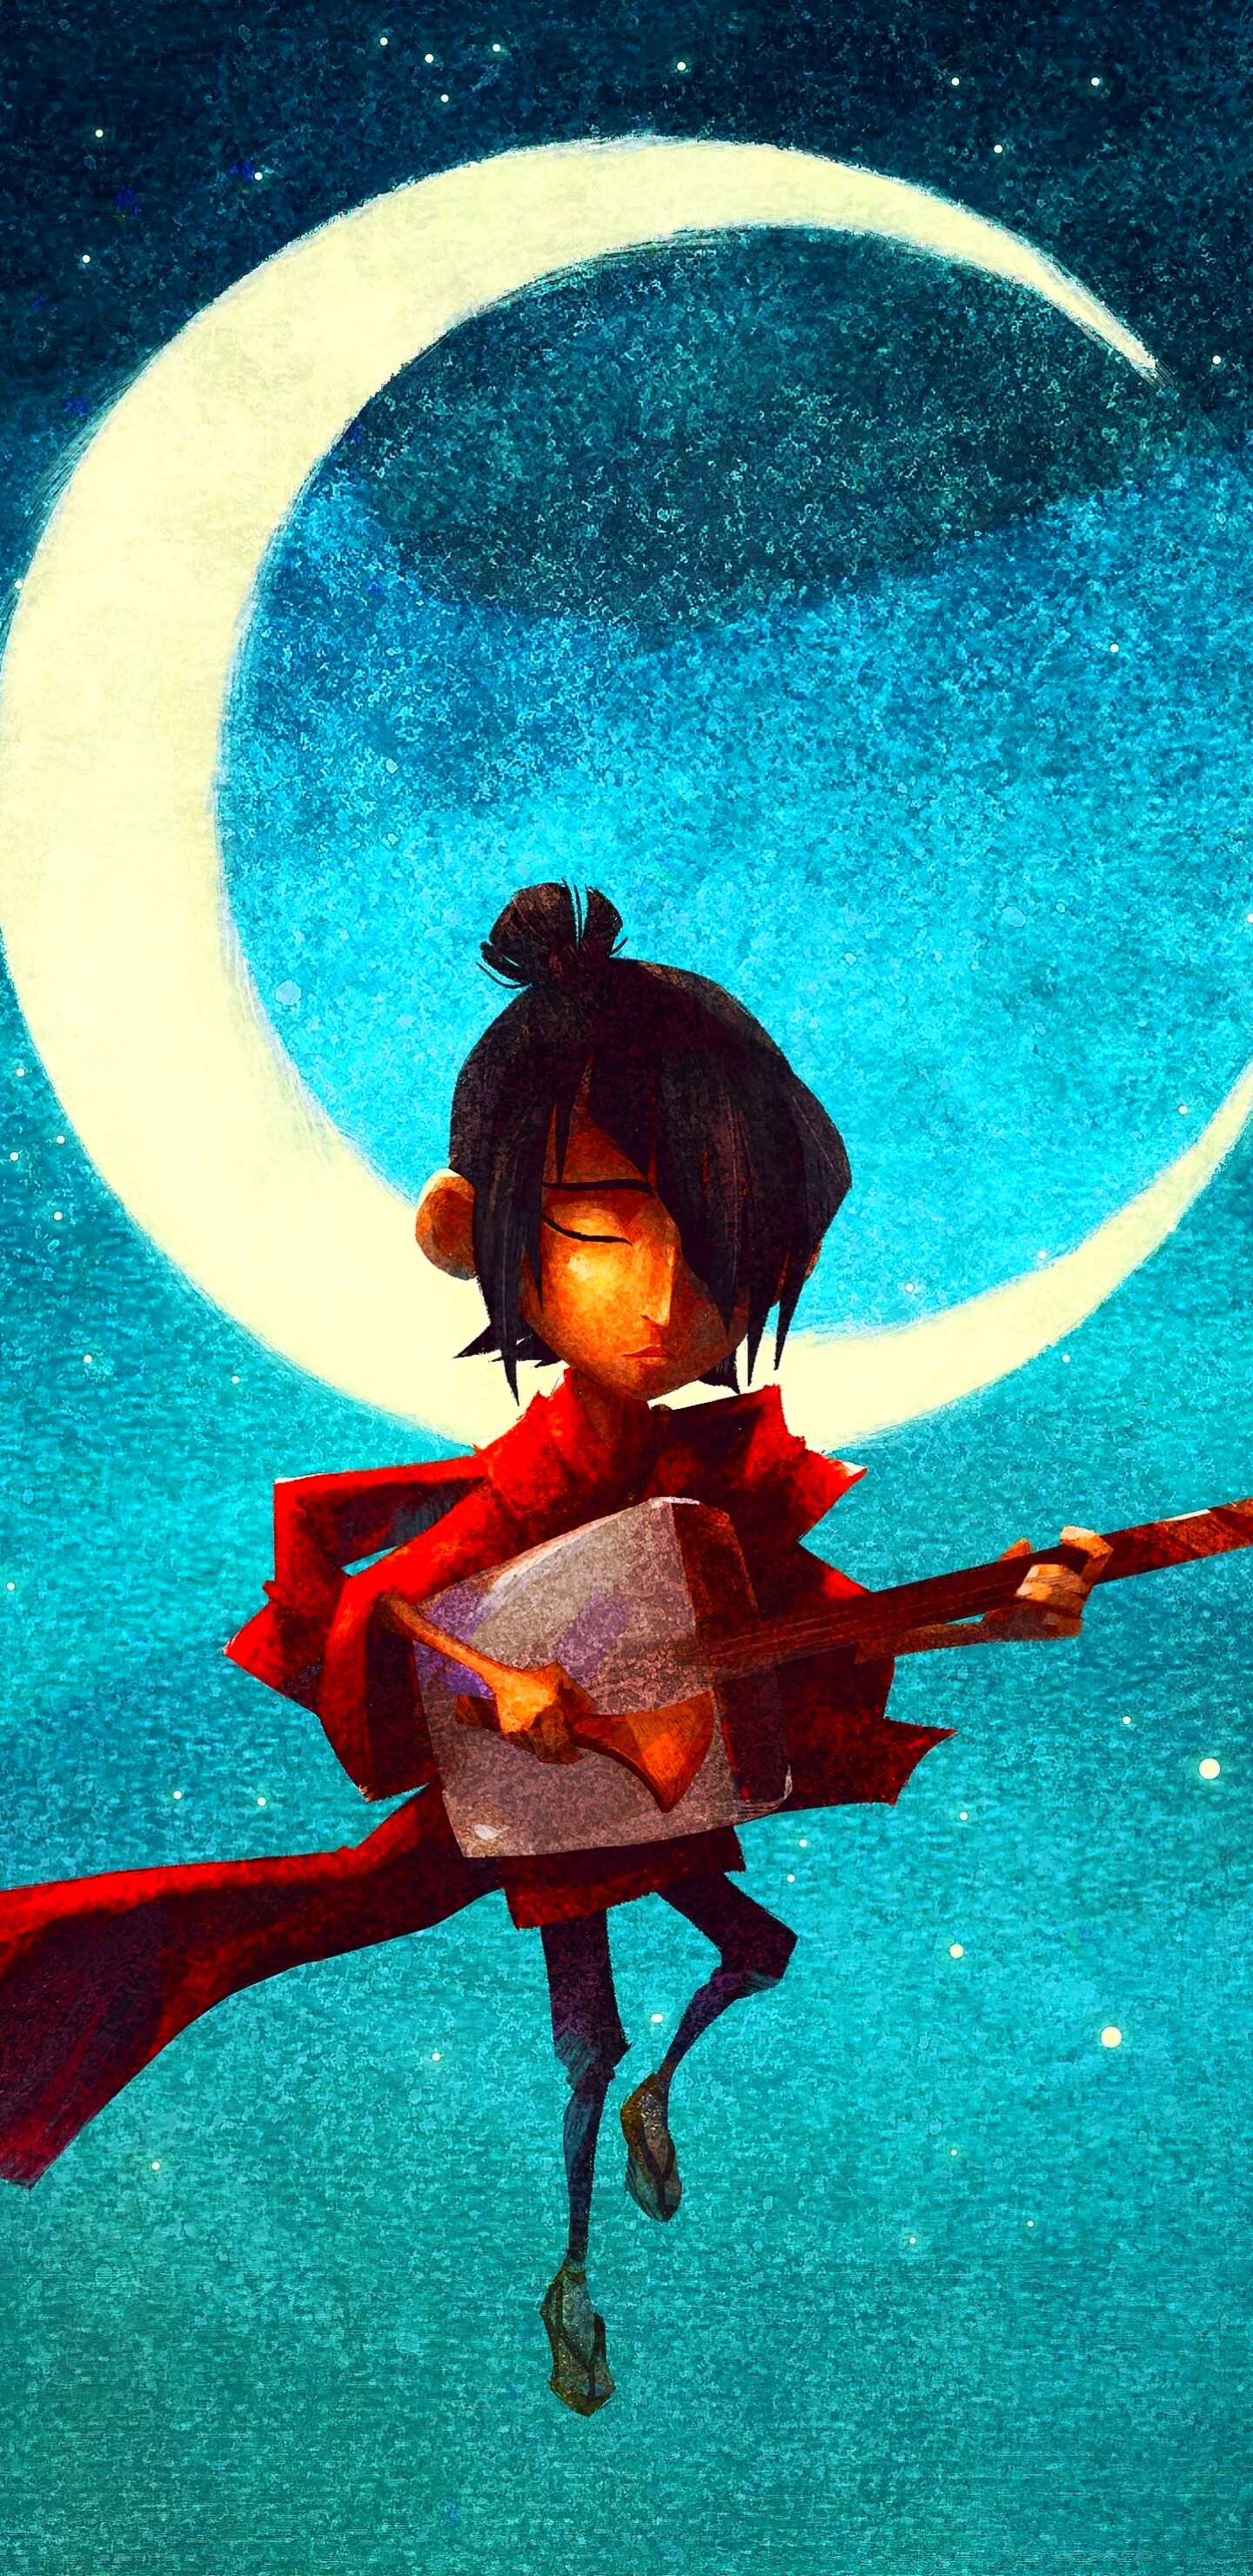 HD wallpaper, 1440X2960 Hd Phone, Animation, Iphone Hd Kubo And The Two Strings Wallpaper Image, Kubo, Film, Two Strings